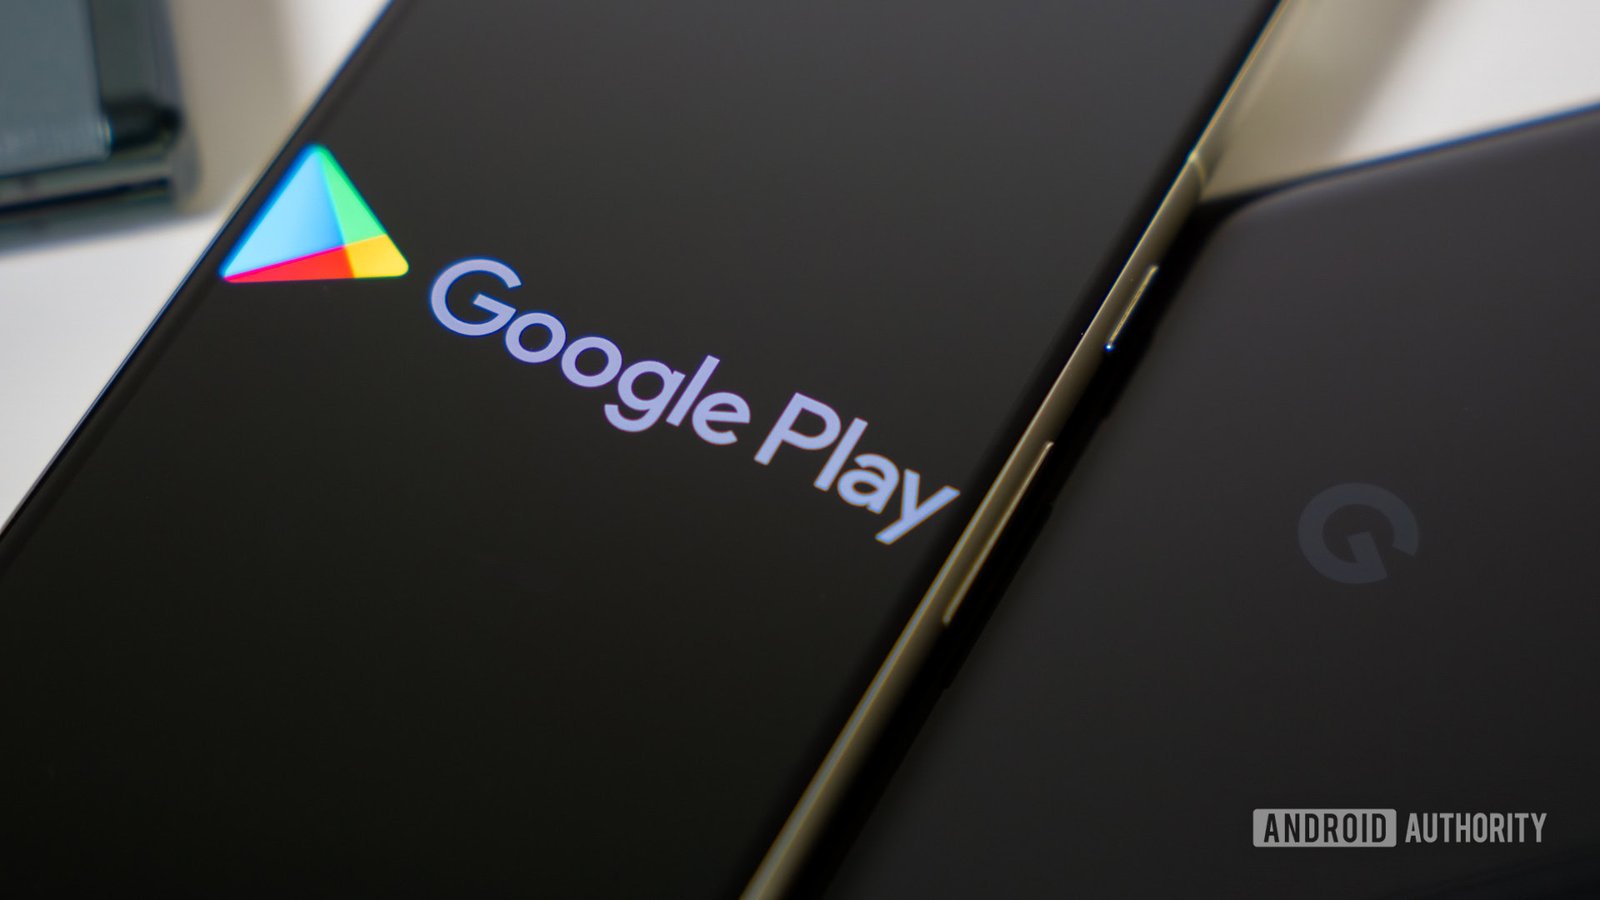 Google has more than doubled Play Store’s app price limit to $1,000